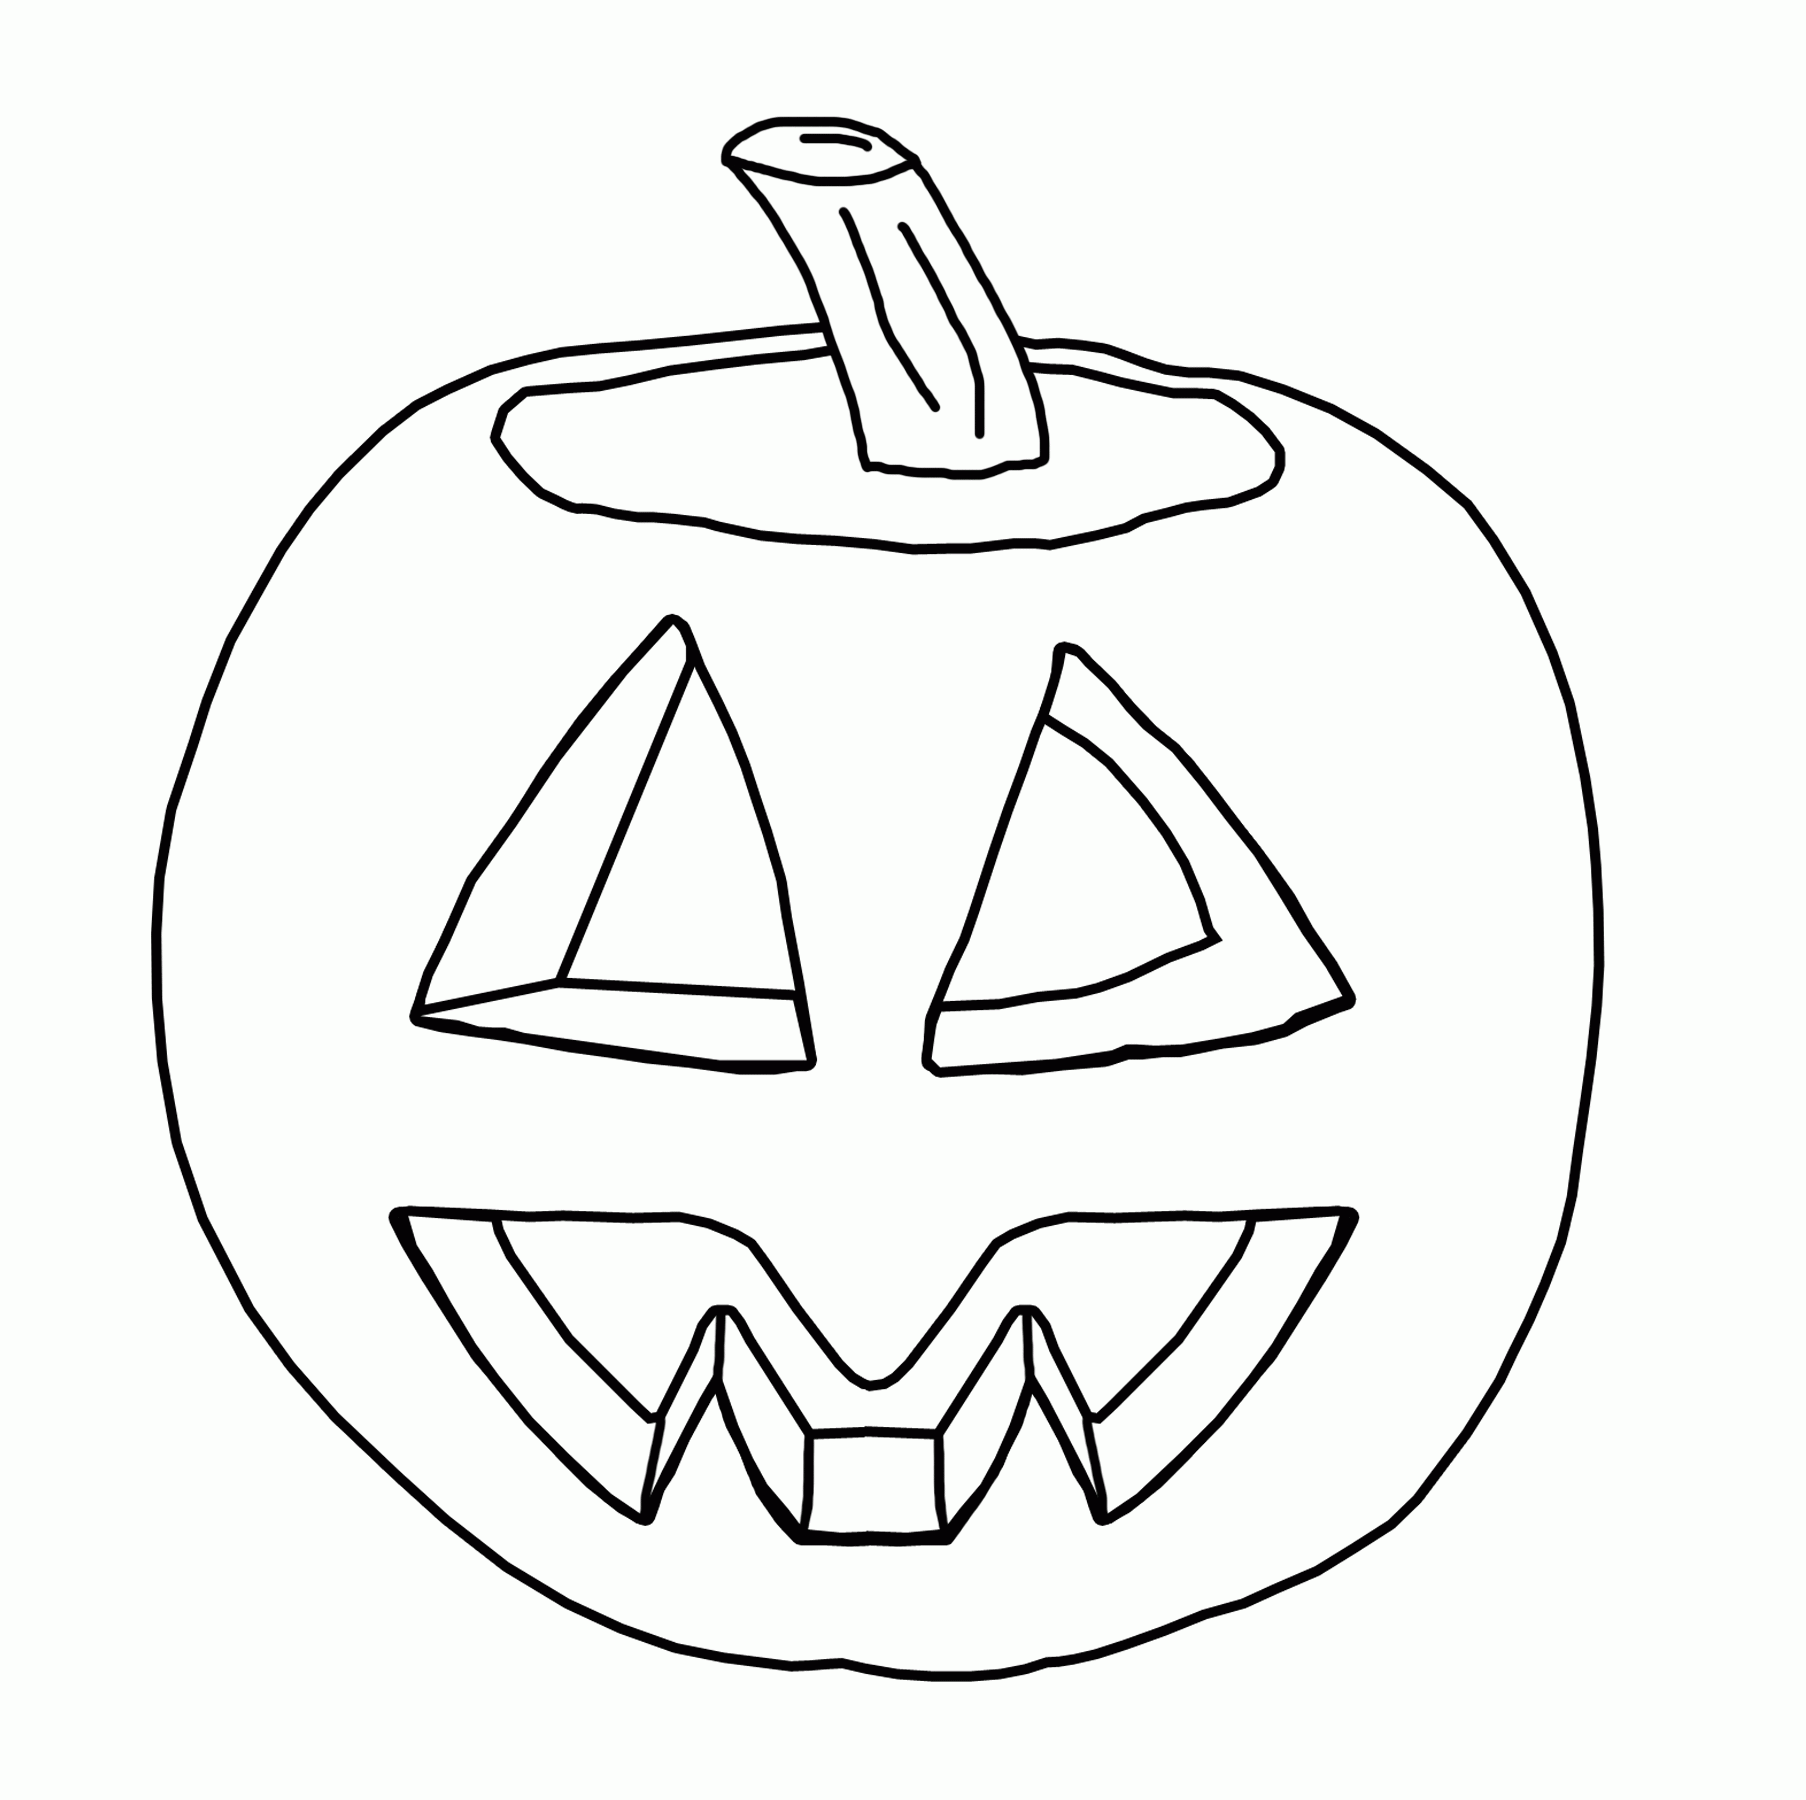 Jack O Lantern Coloring Page Free Large Images Coloring Home